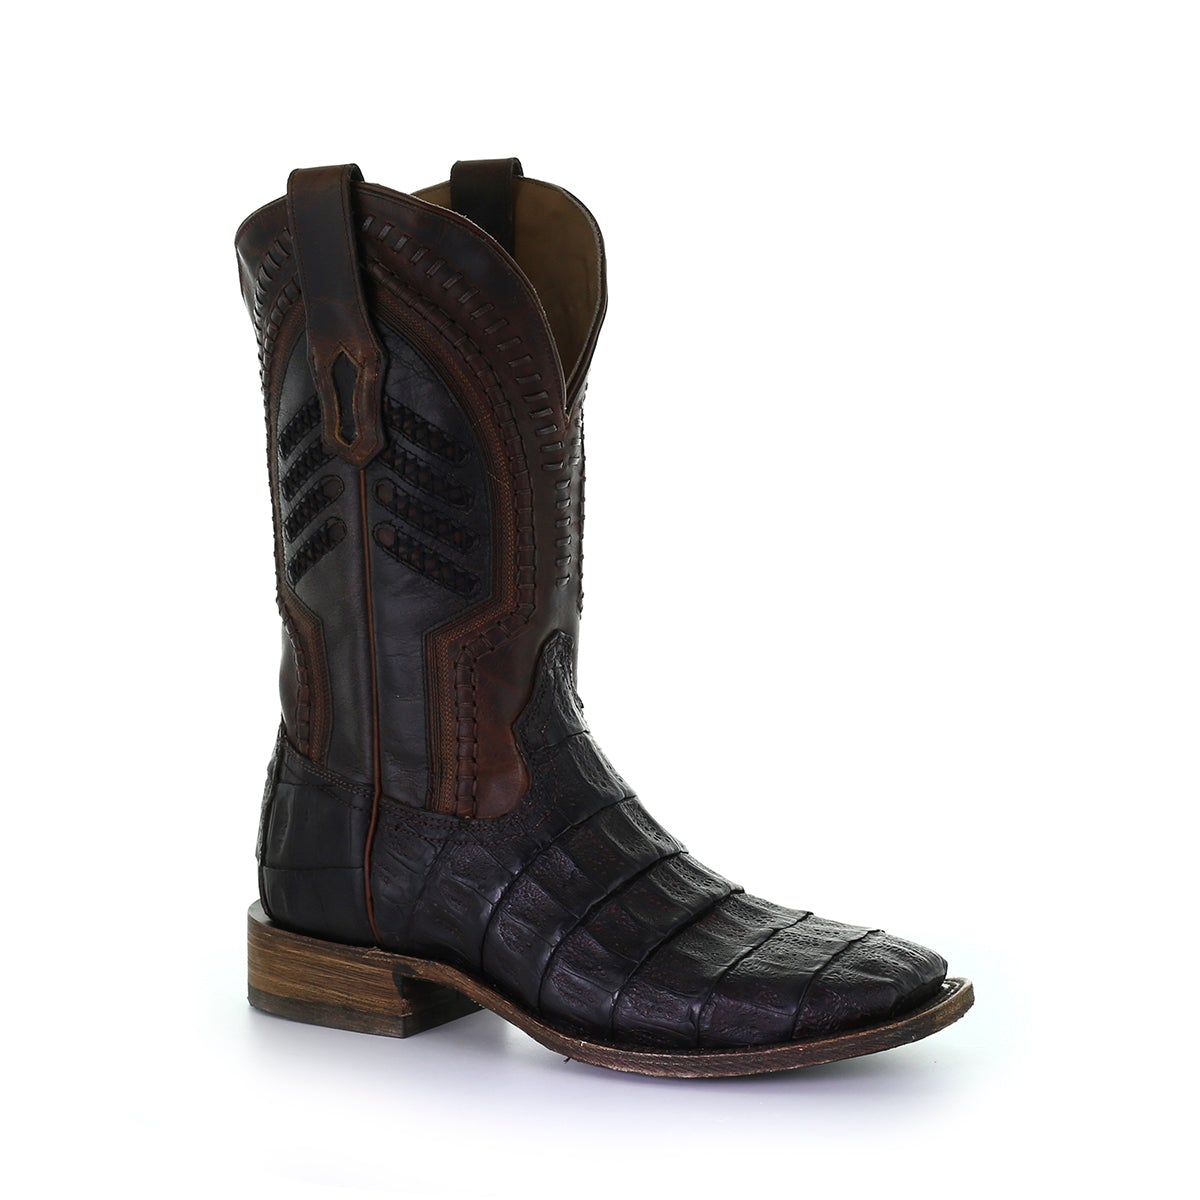 A3878 - Corral brown western cowboy caiman boots for men-Kuet.us